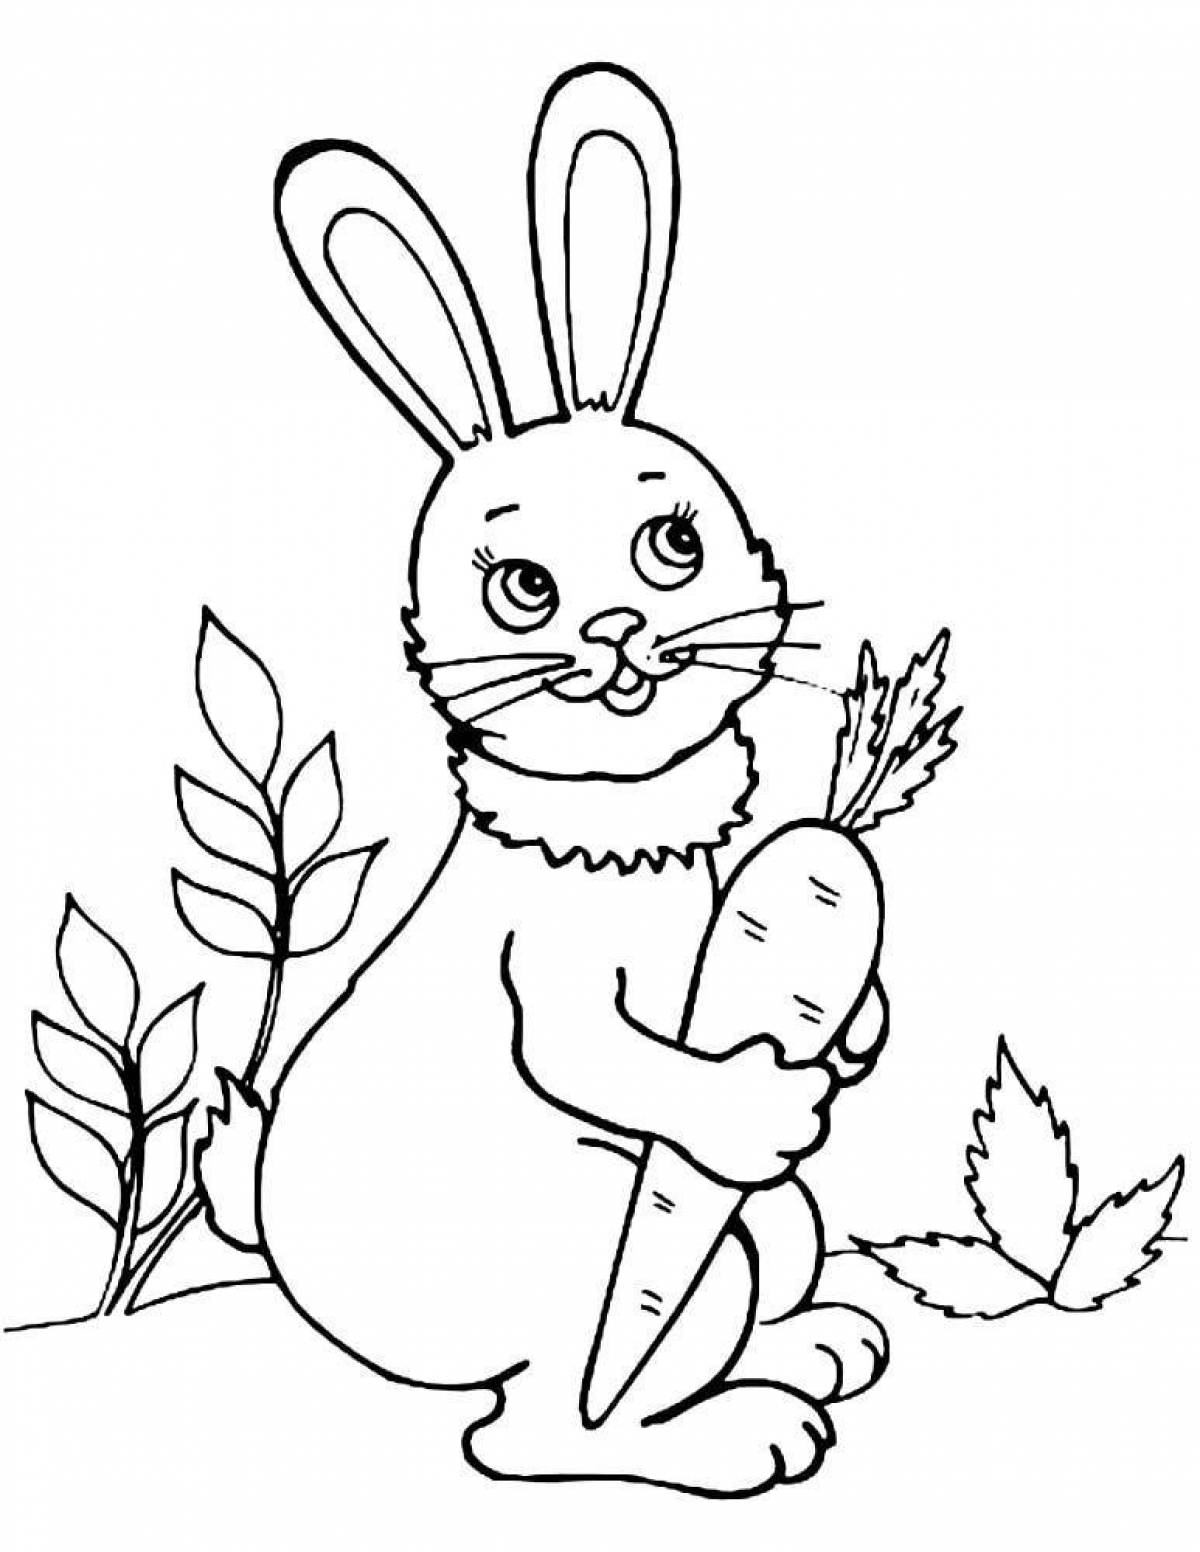 Bright coloring rabbit with carrots